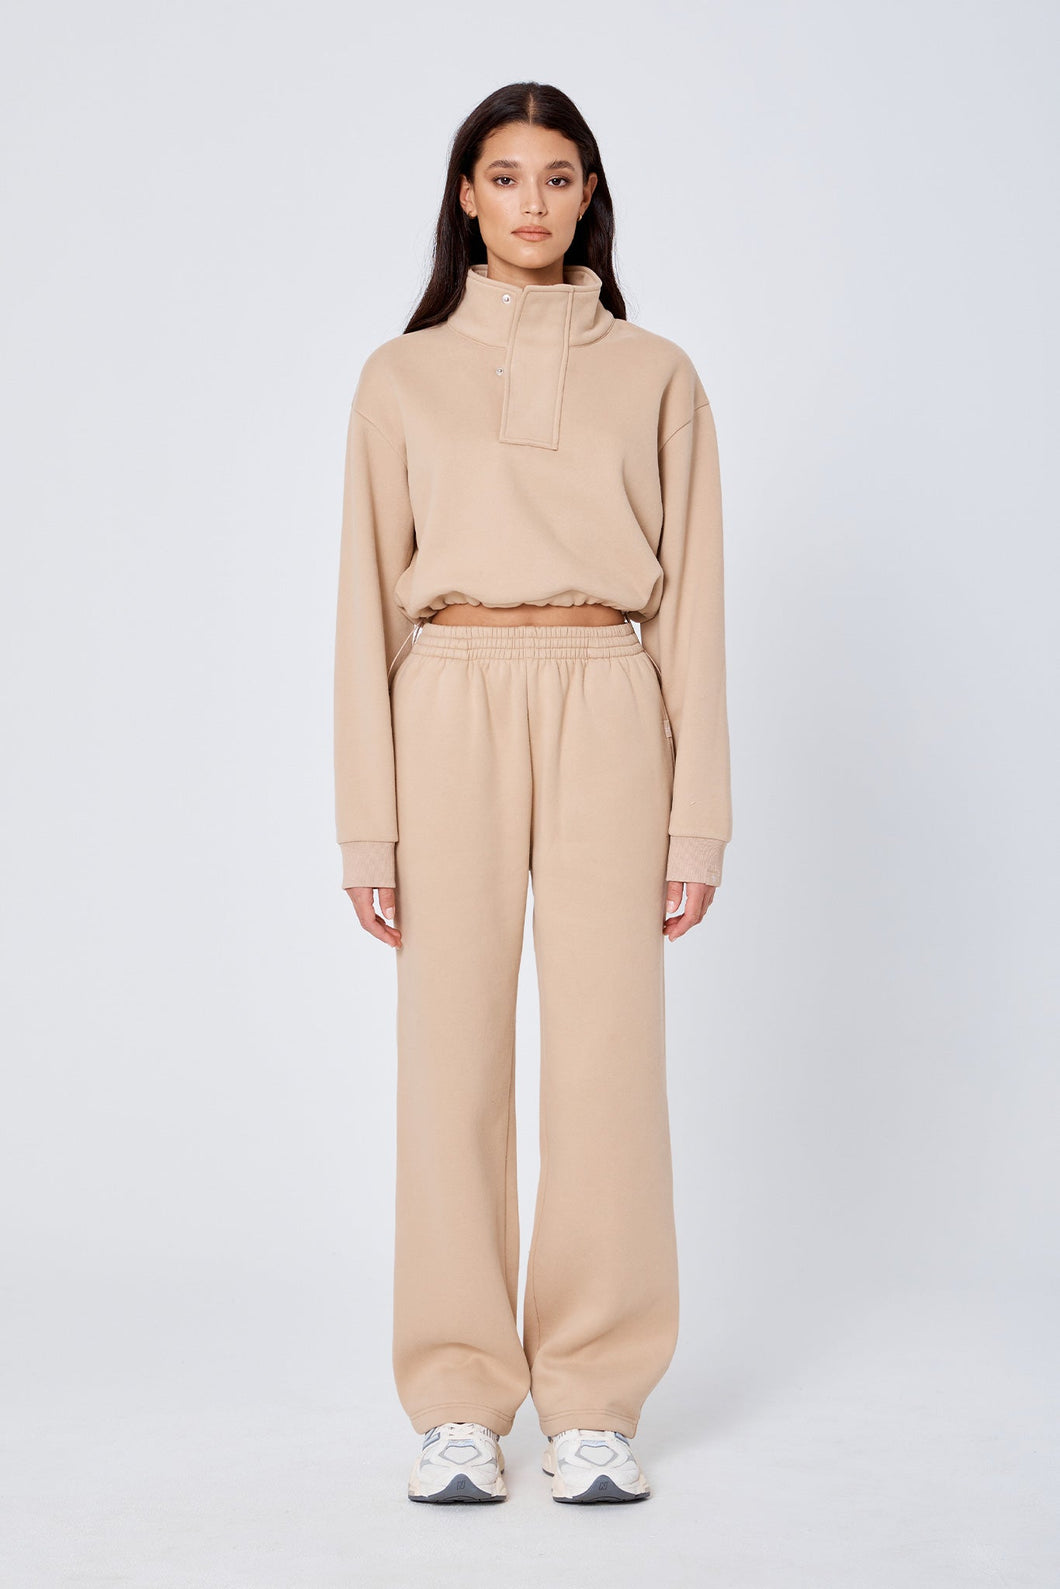 The Straight Leg Track Pant in Sand